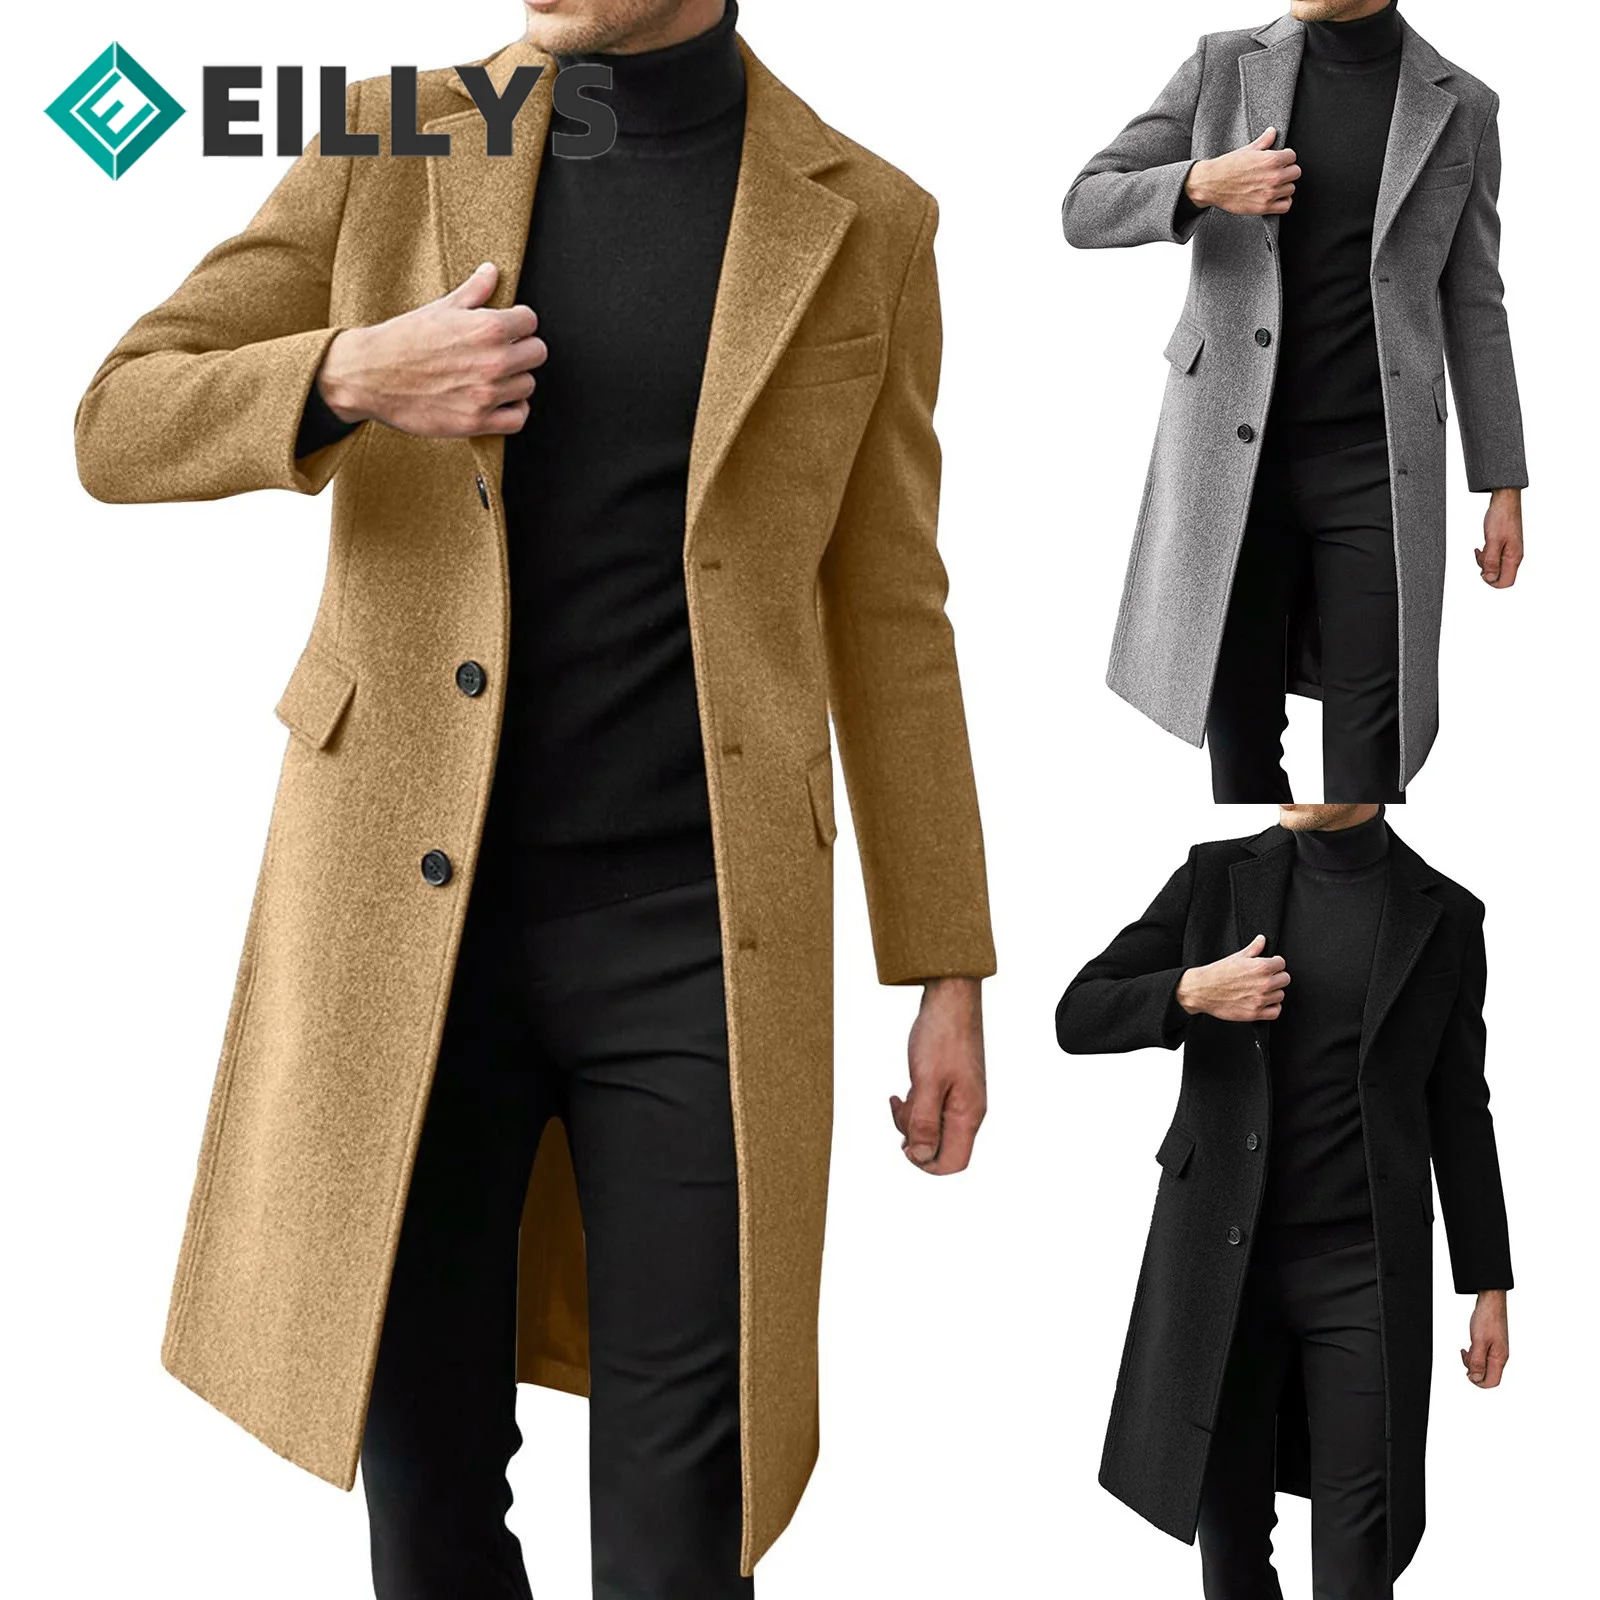 

2022 Autumn and Winter Long Wool blends Coat Wool Blend Pure Color Casual Business trench coat Fashion Men Clothing Windbreaker